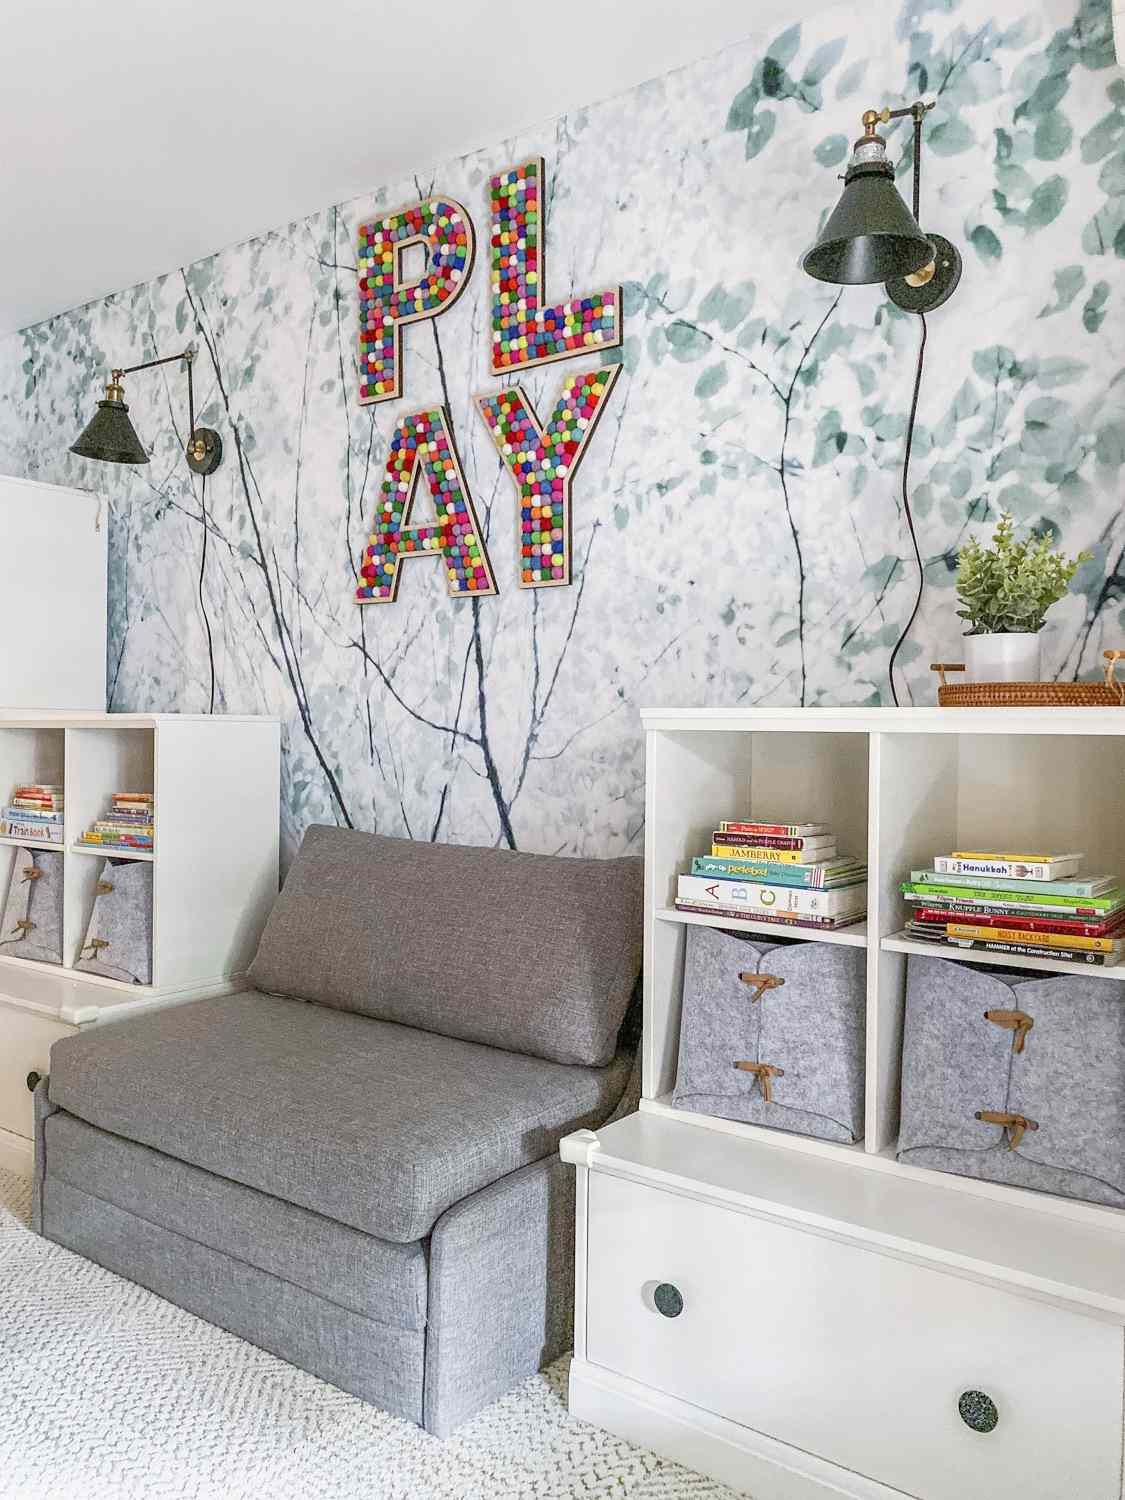 tree branches and leaves speckled throughout bring the outdoors inside in this playroom